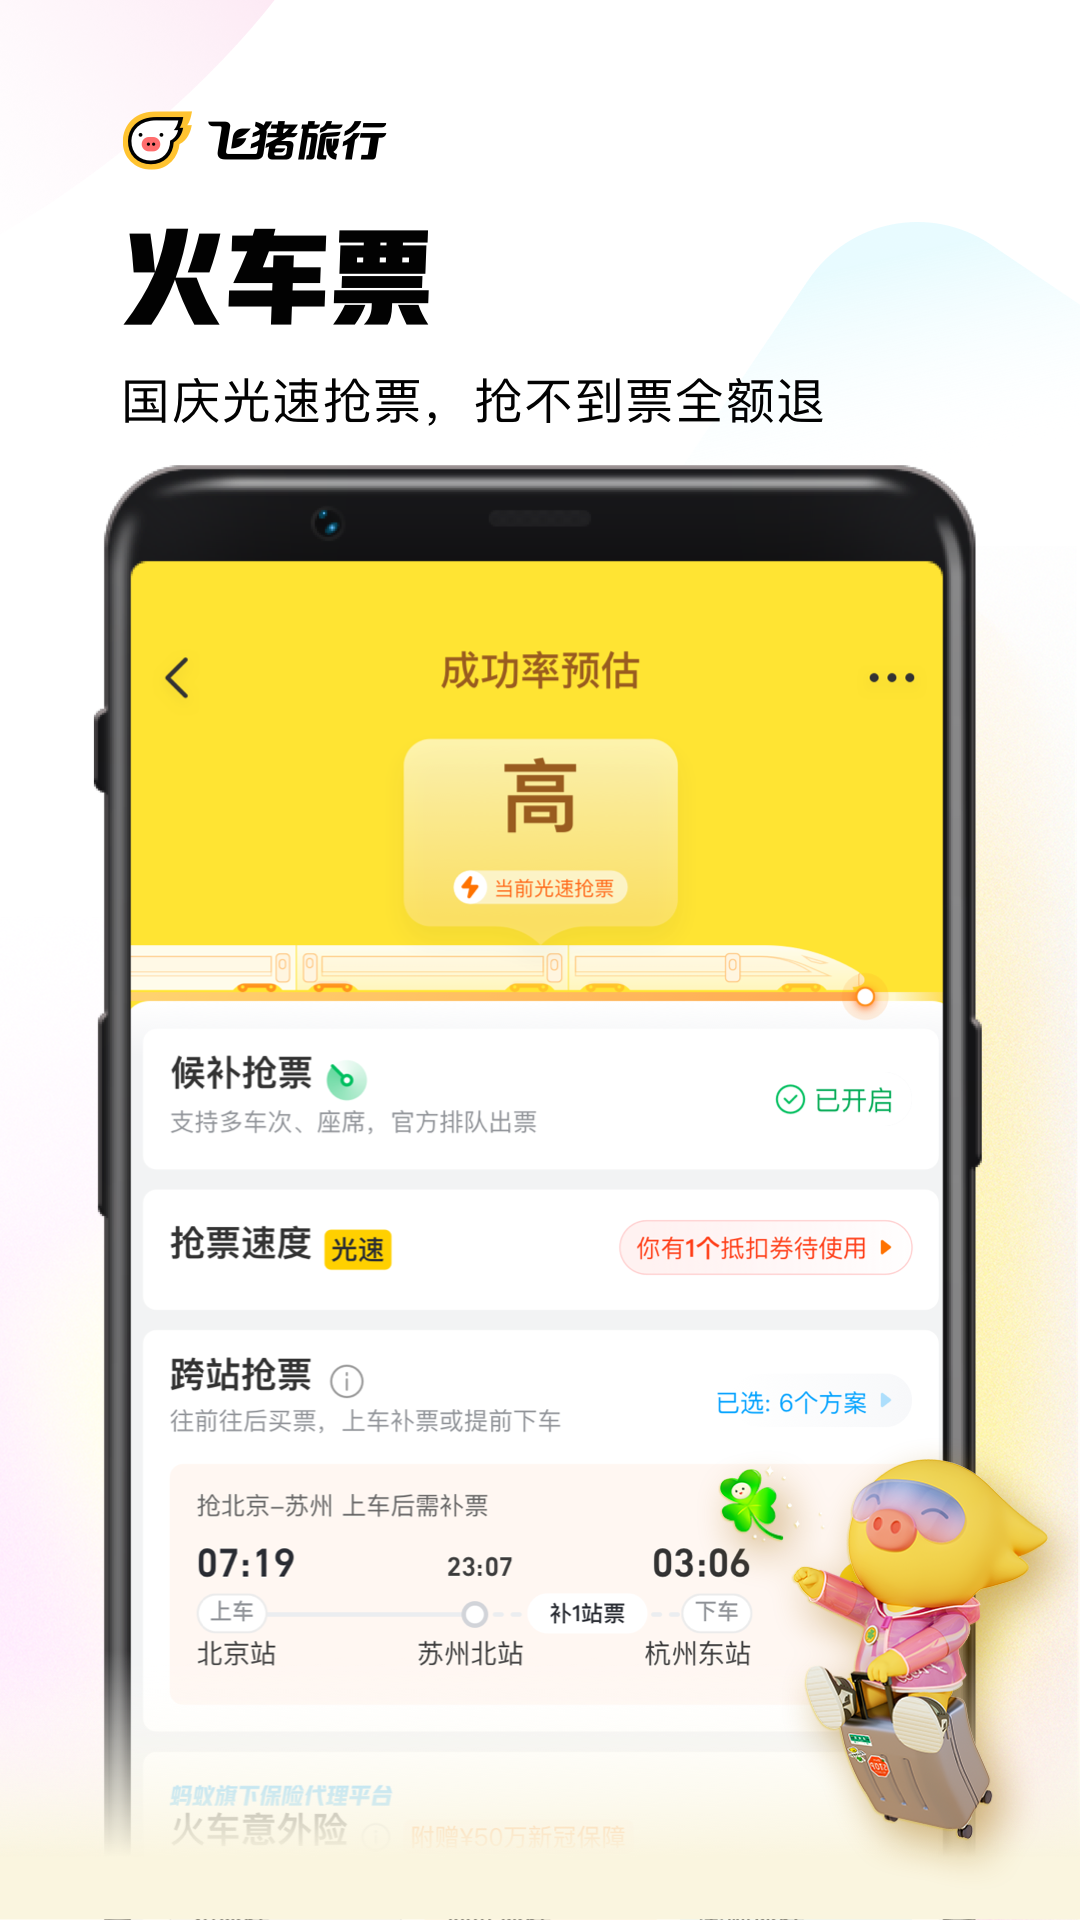 Android application 飞猪旅行 screenshort